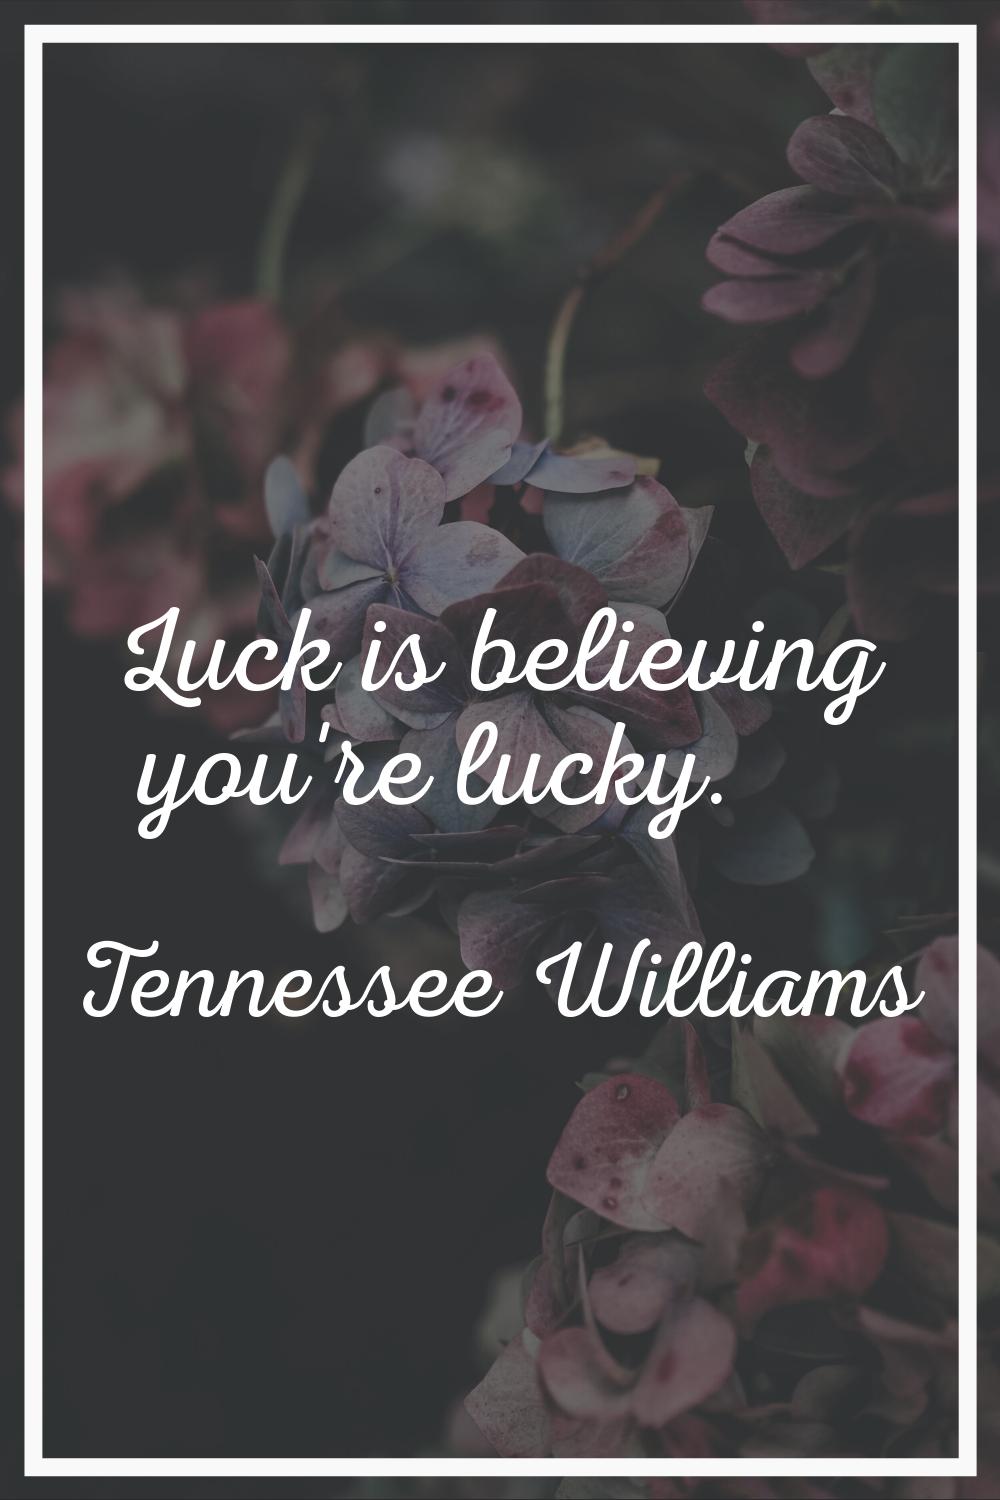 Luck is believing you're lucky.